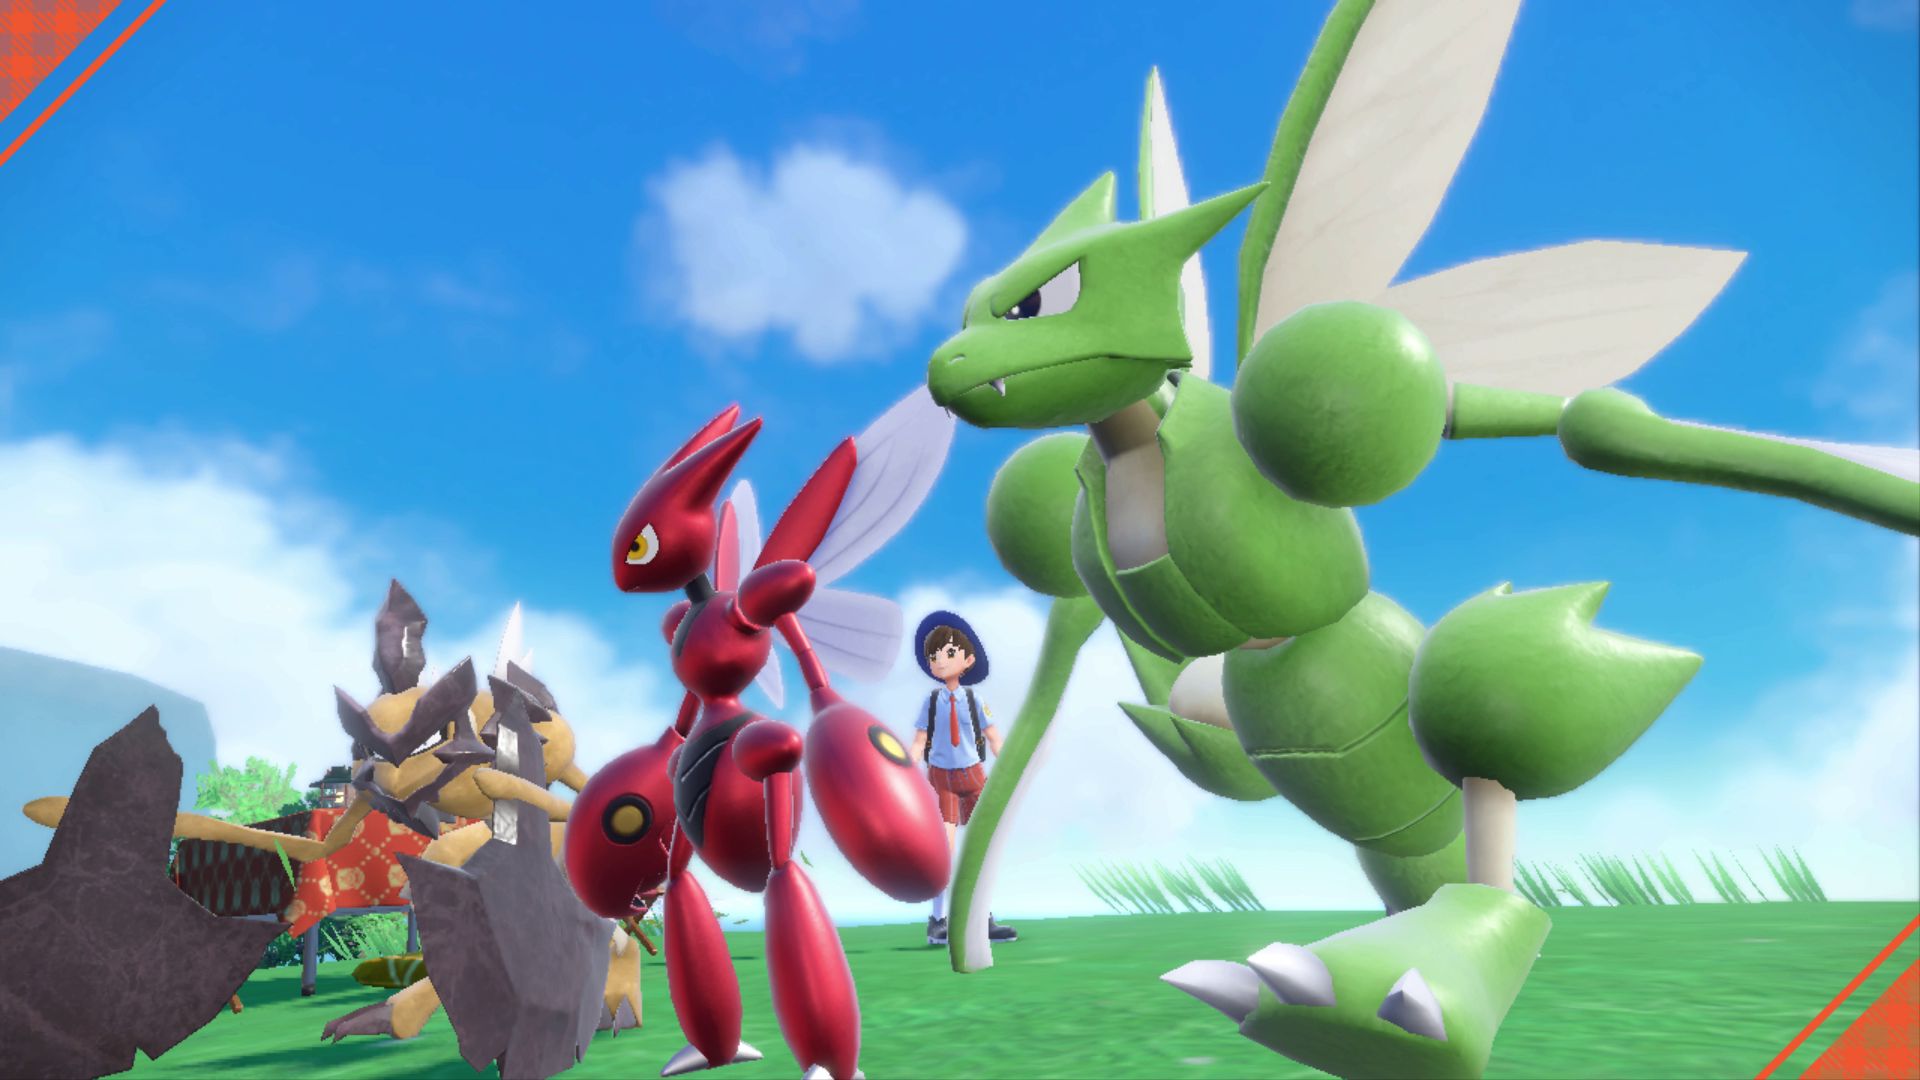 PS4 gains new game release from Pokemon developer as Nintendo